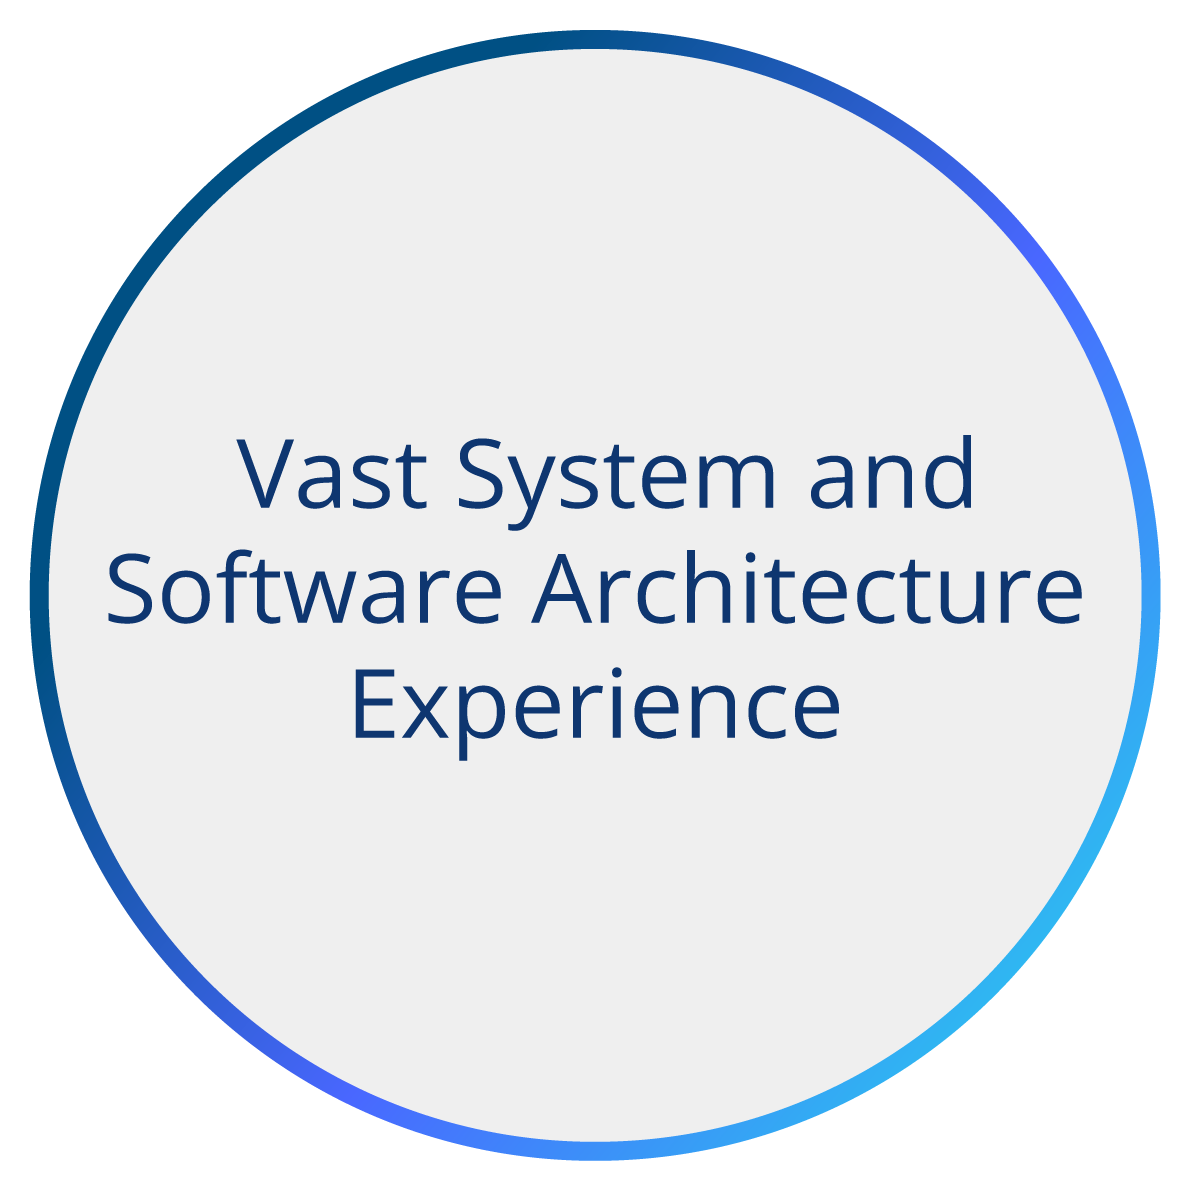 Vast System and Software Architecture Experience